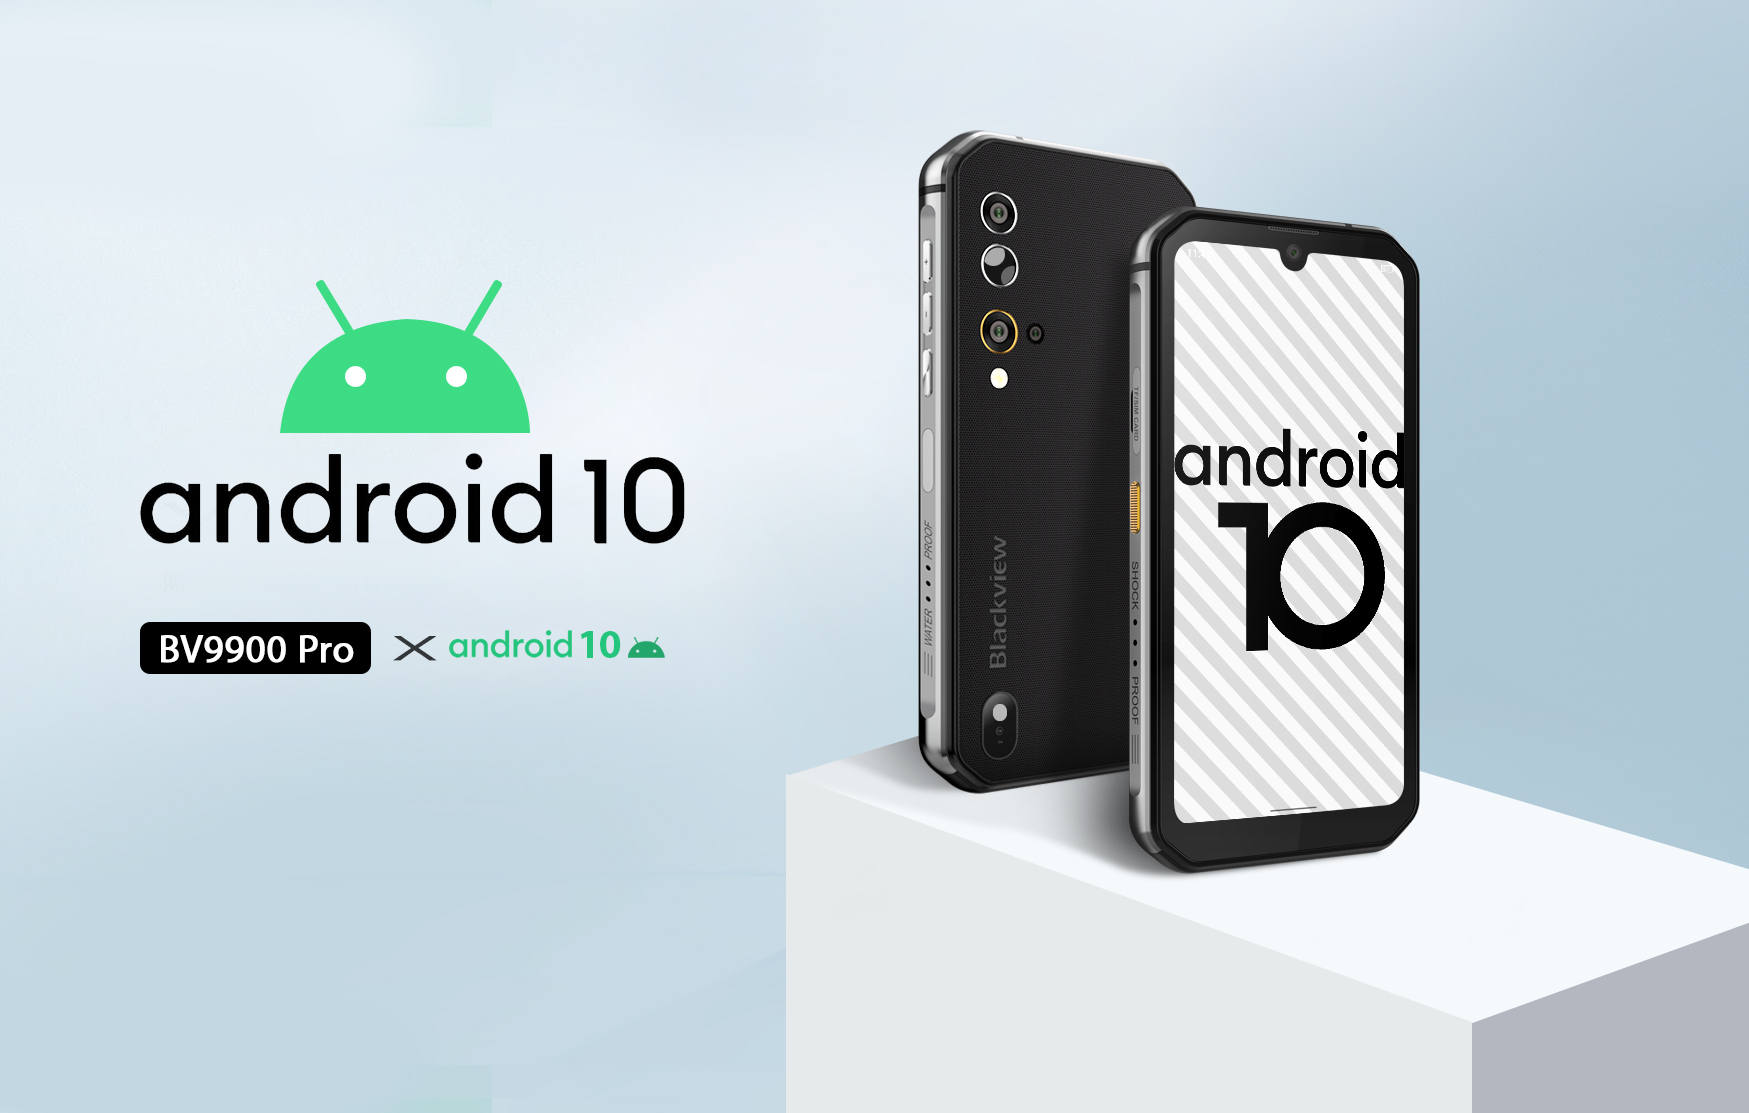 Android 10 version